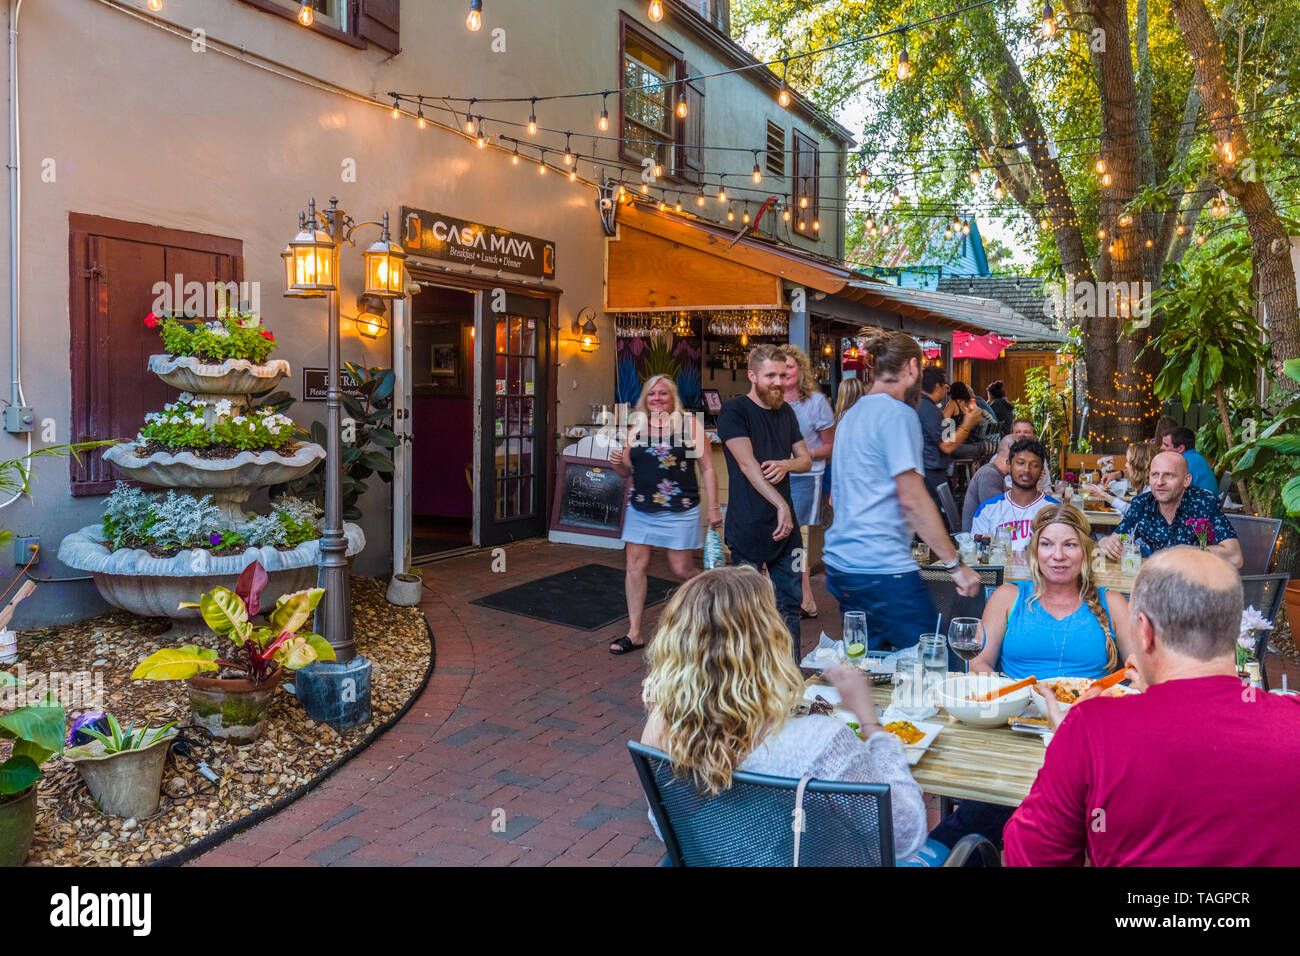 Outdoor restaurant in Historic old section of St Augustine Florida Americas oldest city Stock Photo